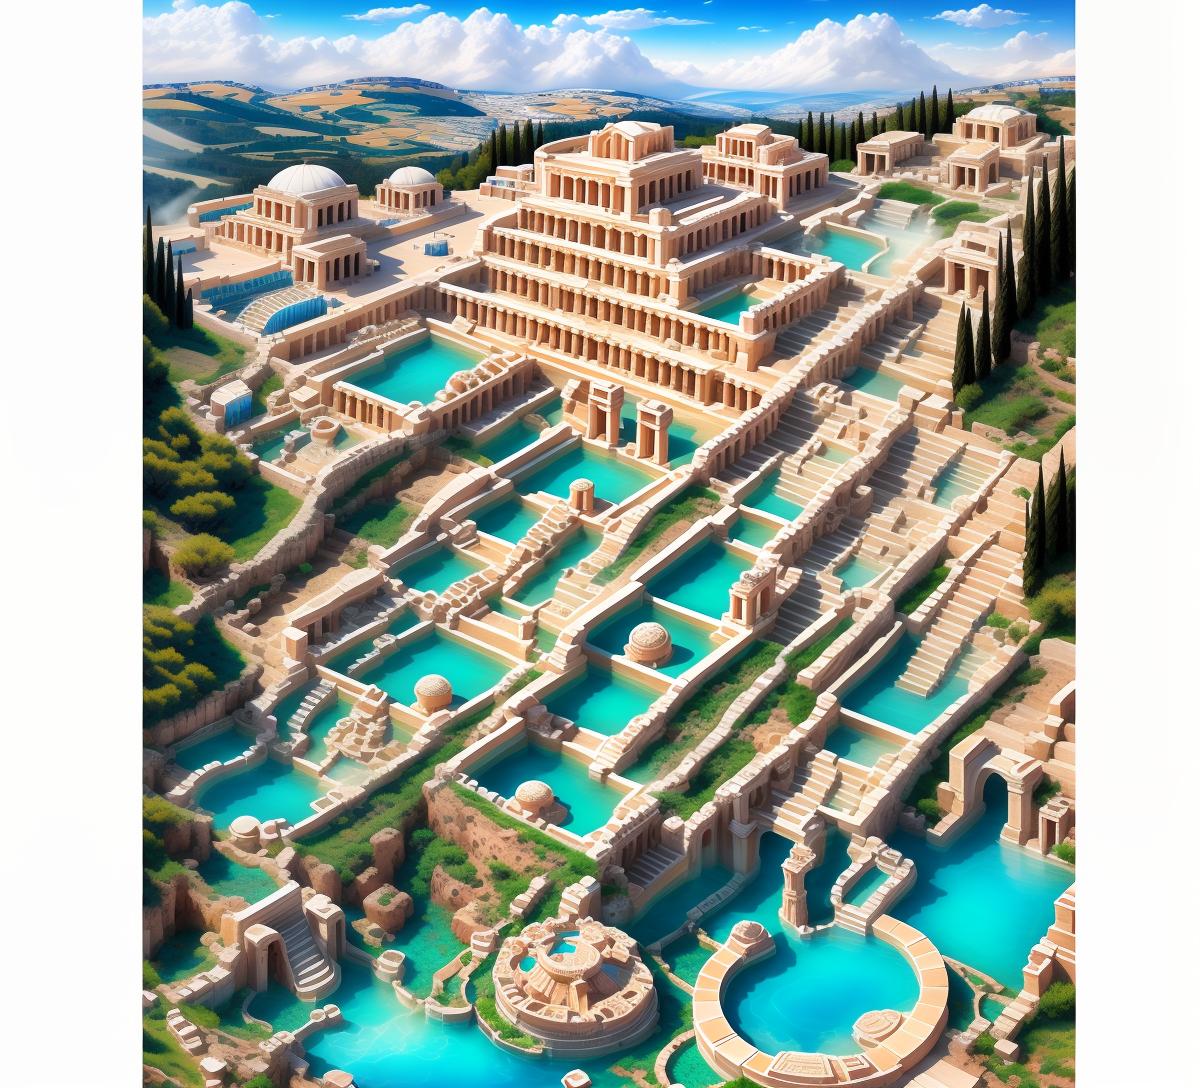  Sky view of highly aesthetic, ancient greek thermal baths in beautiful nature